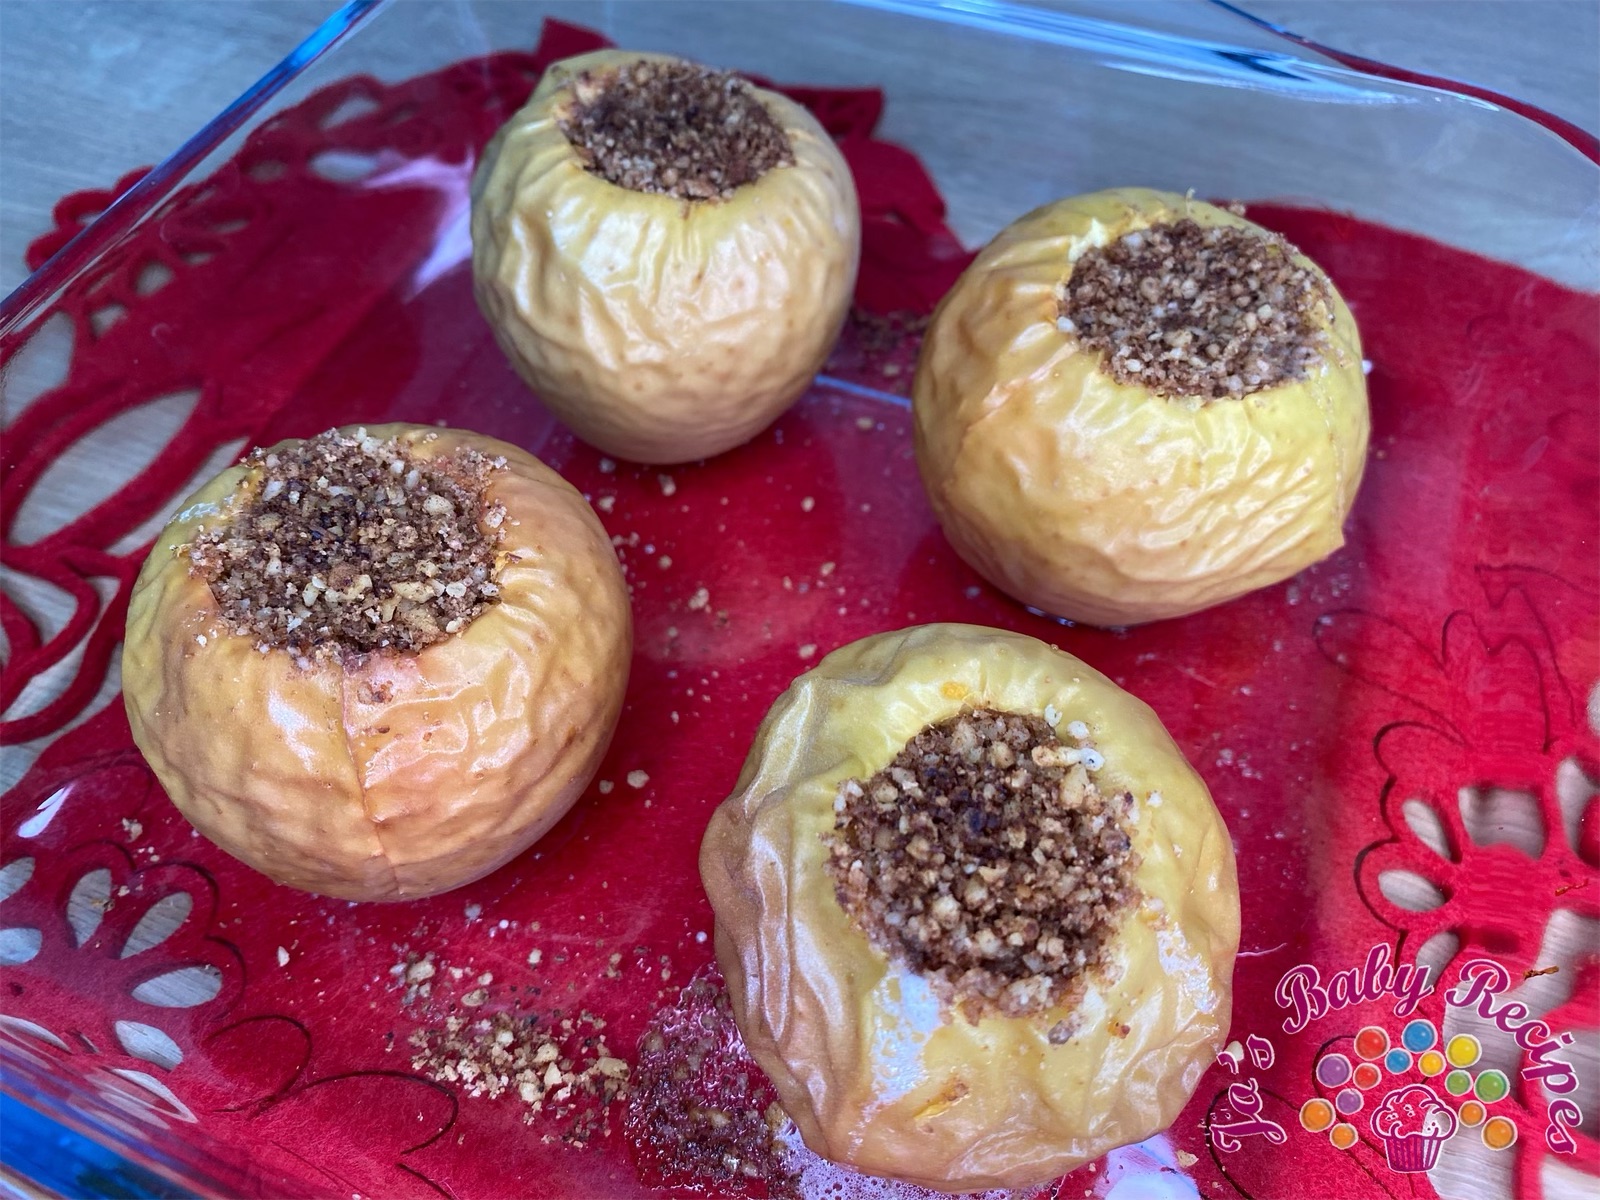 Apples in the oven stuffed with winter spices